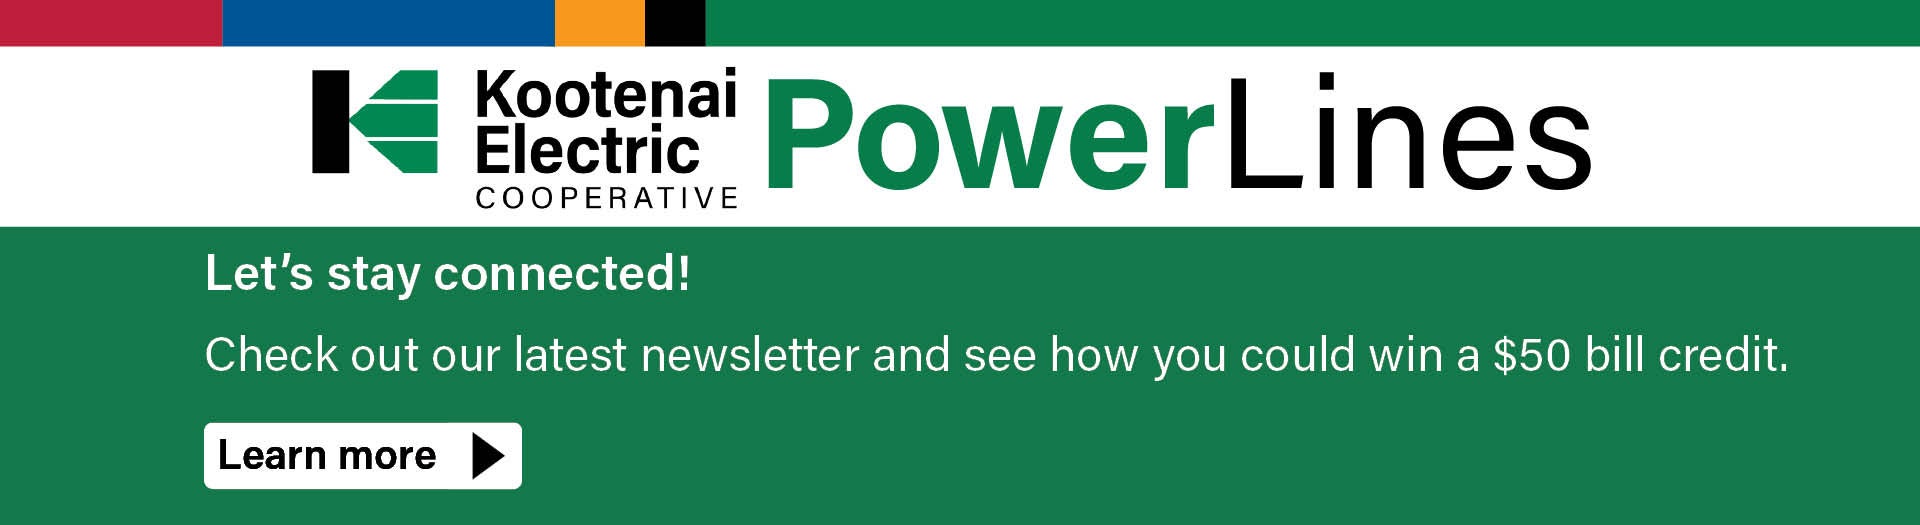 KEC Powerlines. Let’s stay connected! Check out our latest newsletter and see how you could win a $50 bill credit.